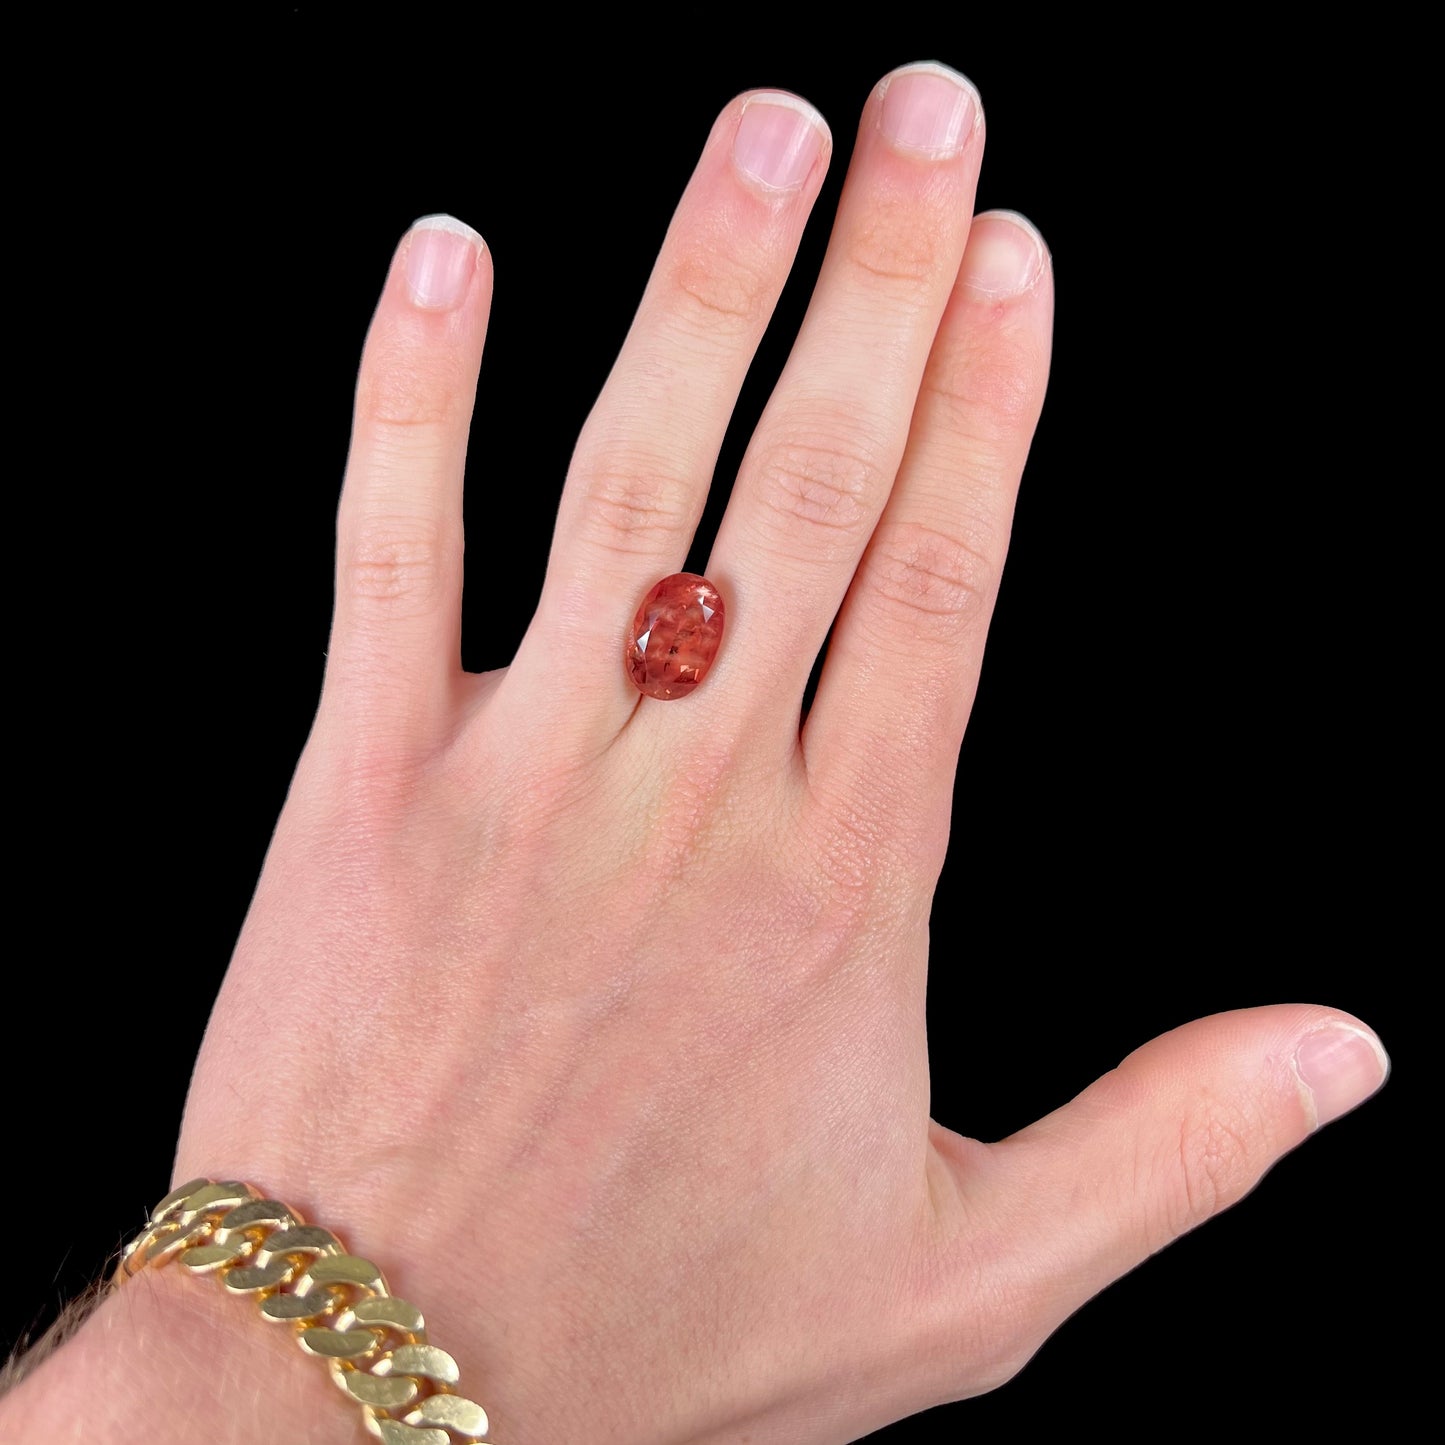 A faceted, oval cut sunstone.  The stone is red-orange color with a bright schiller flash.